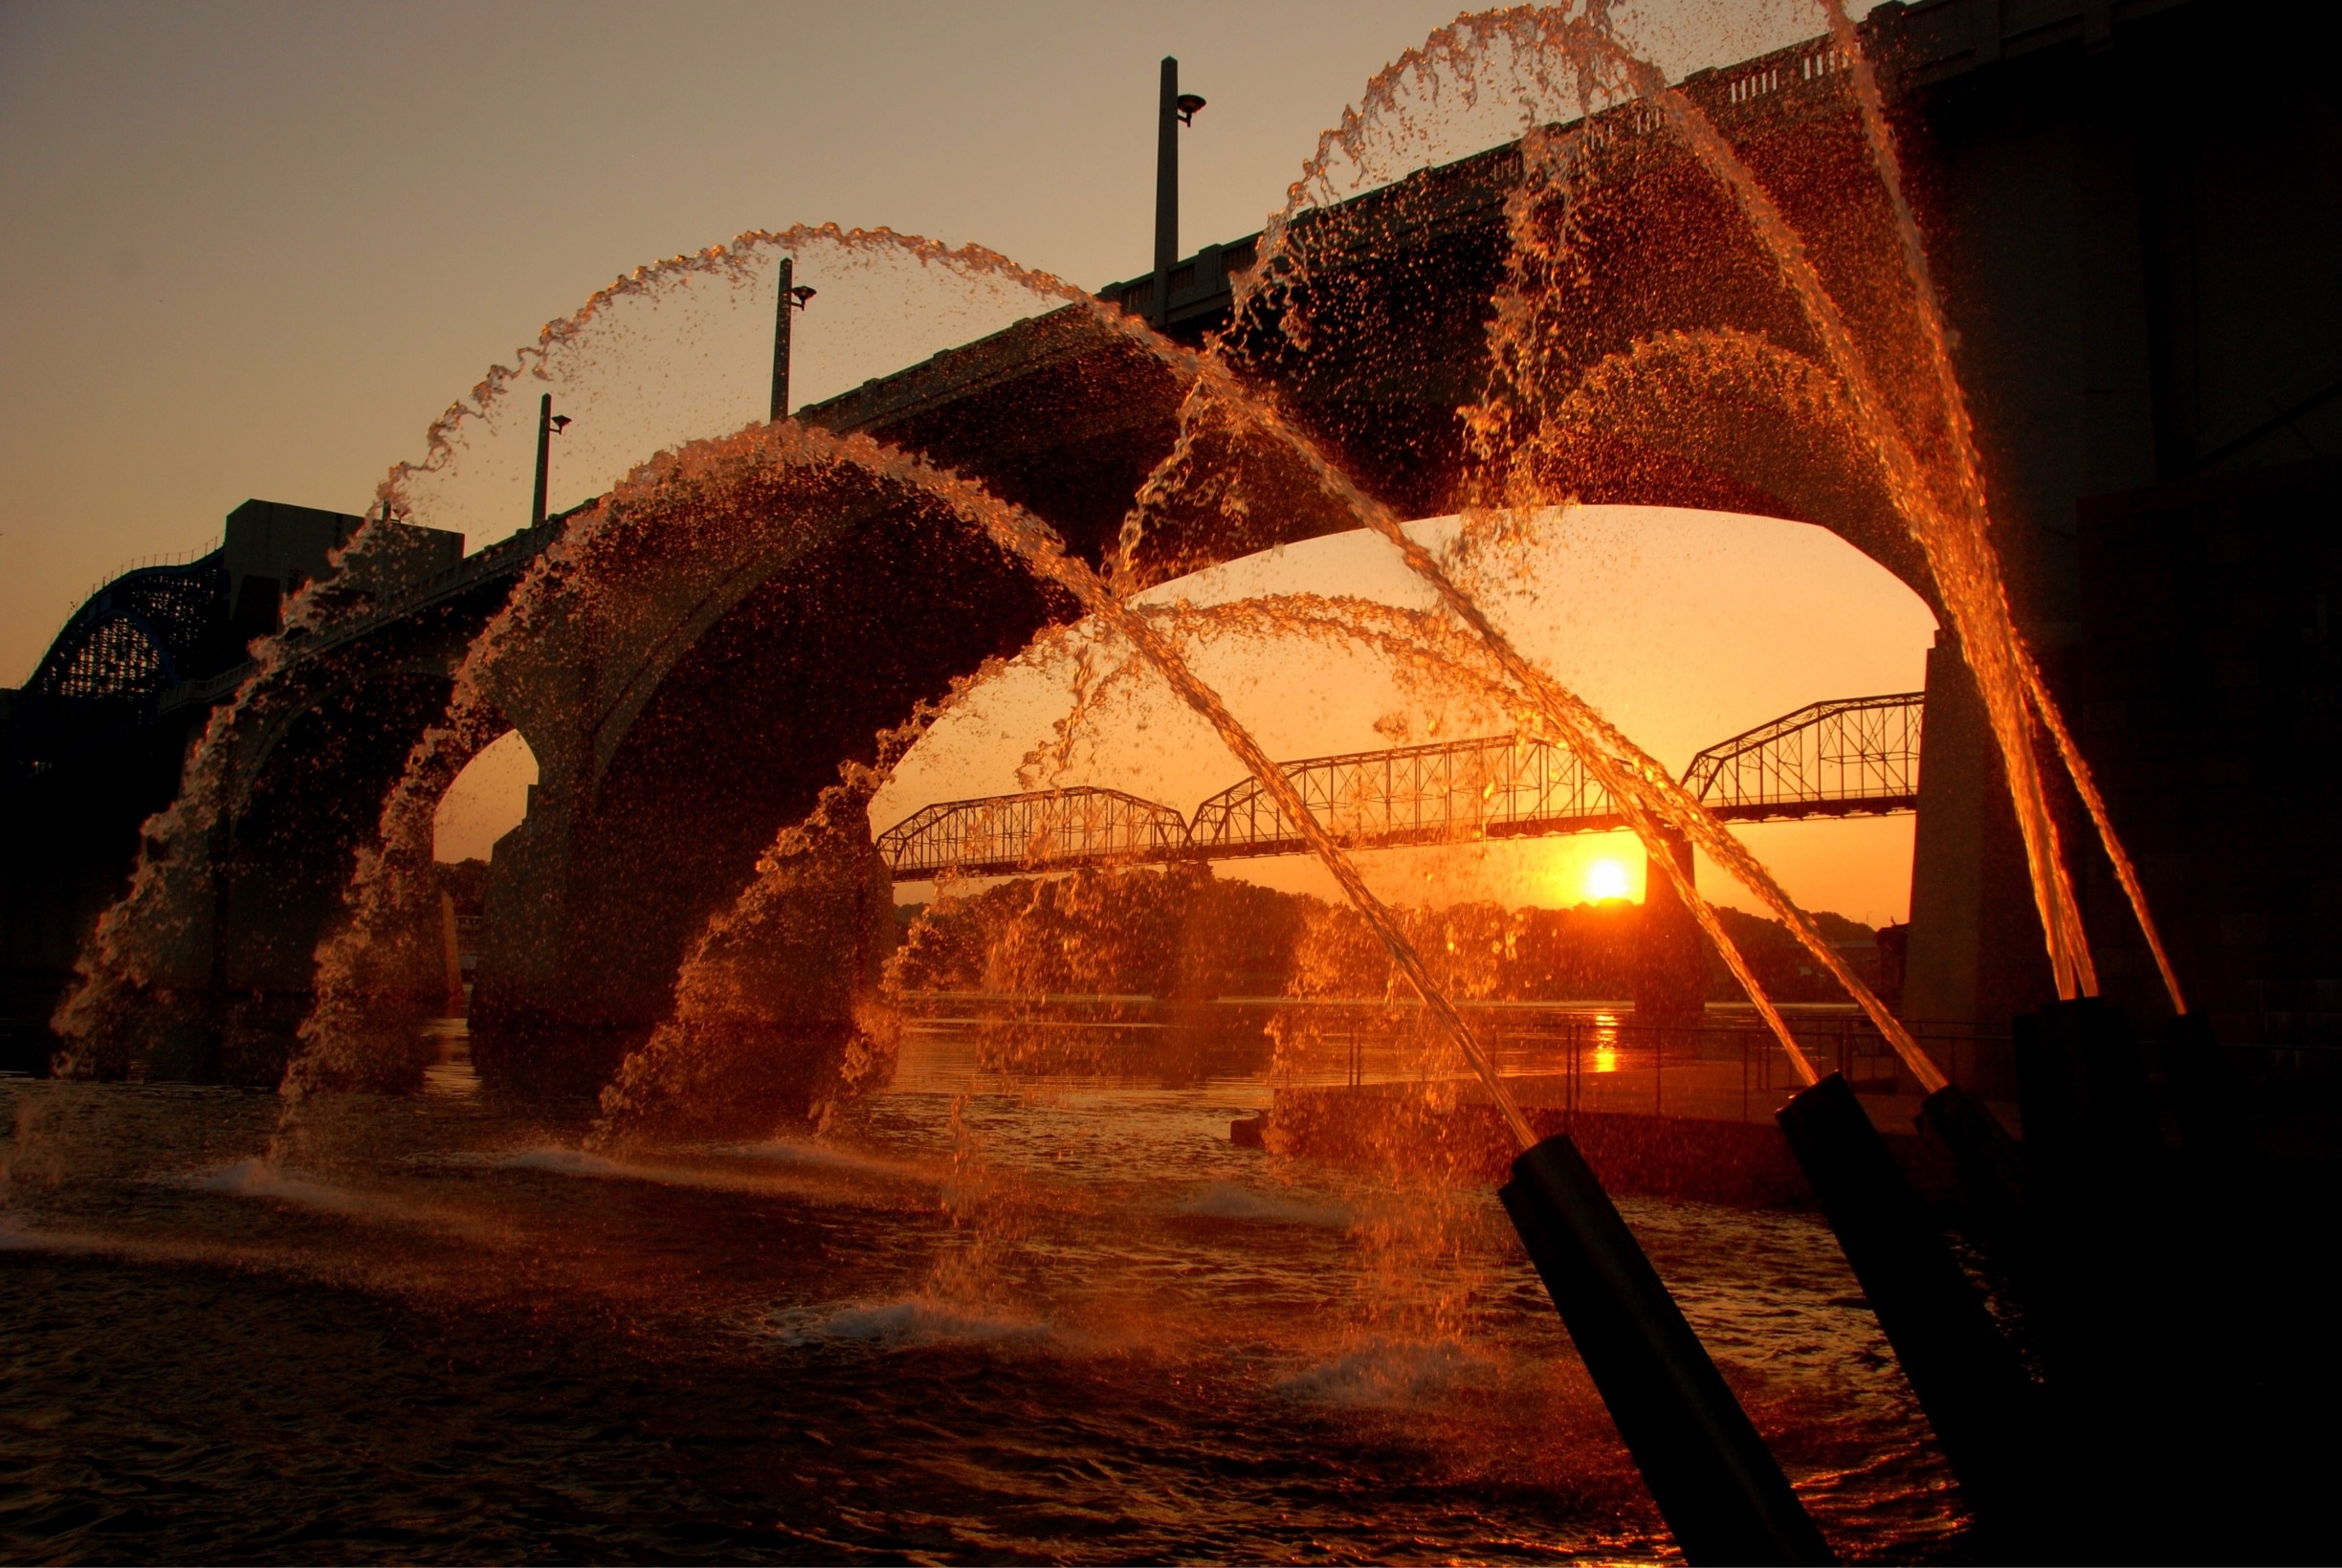 Water cannons at sunrise.